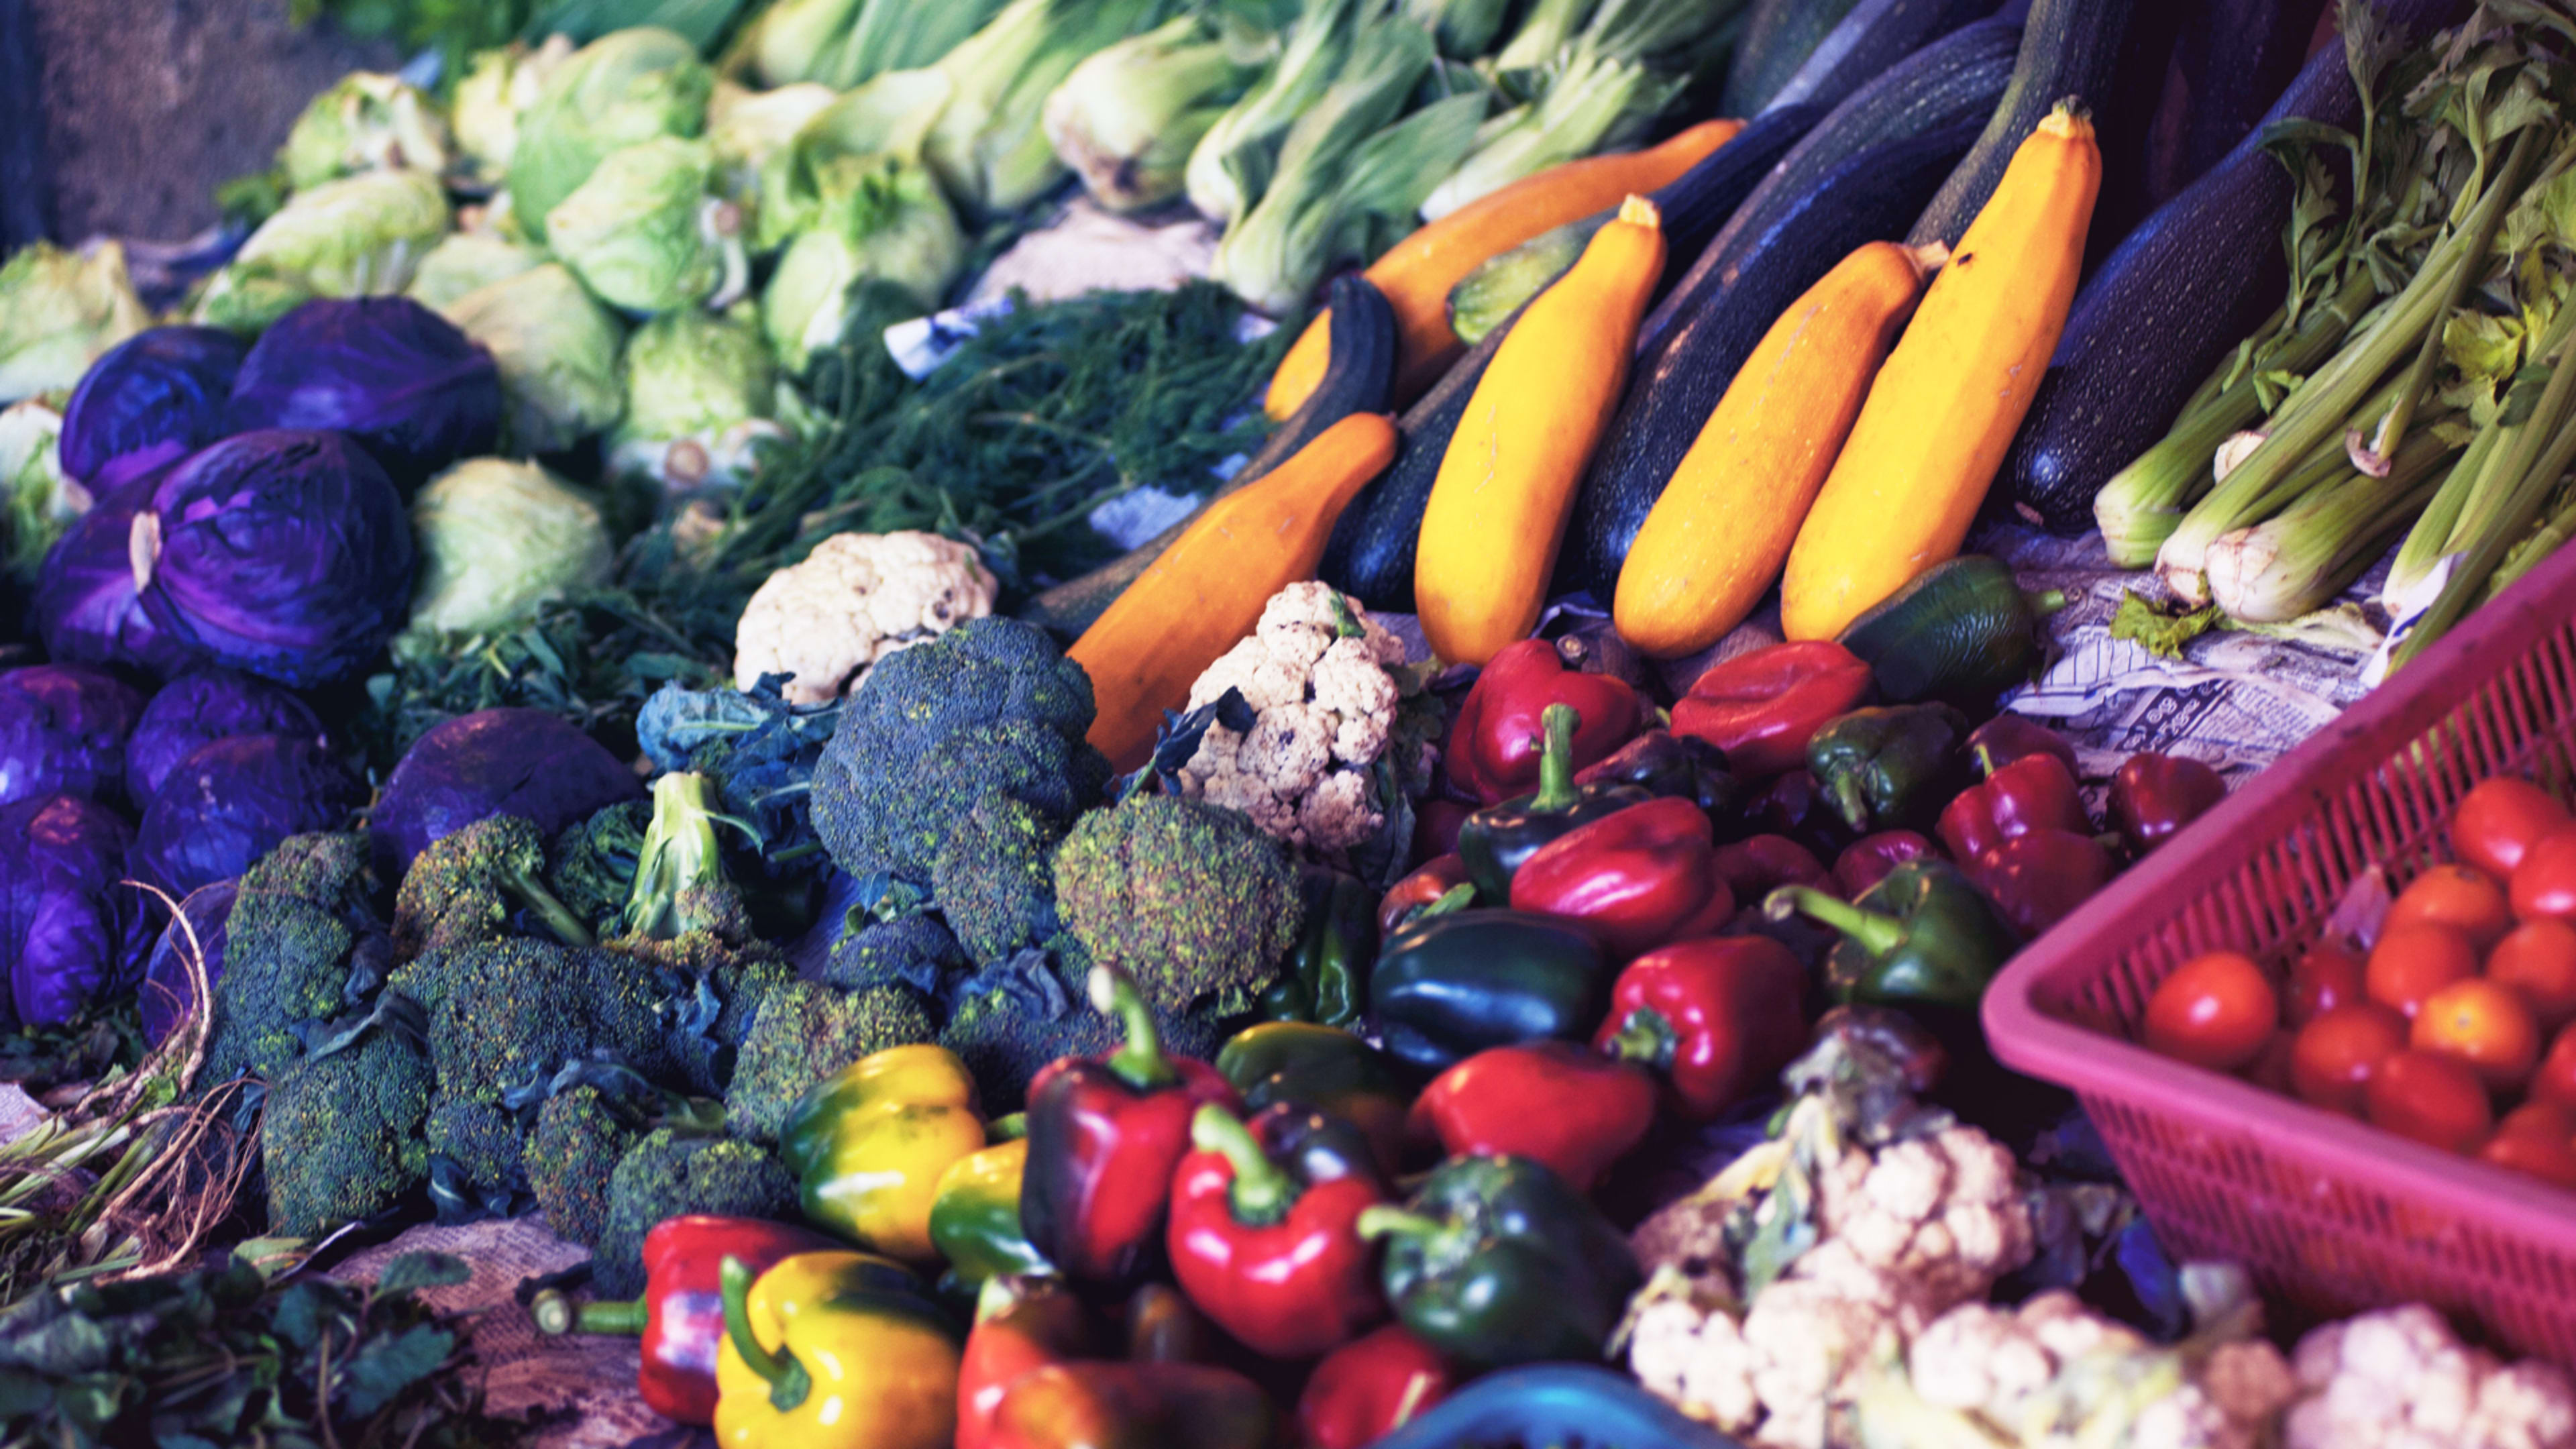 “Prescribing” fruits and veggies would save $100 billion in medical costs